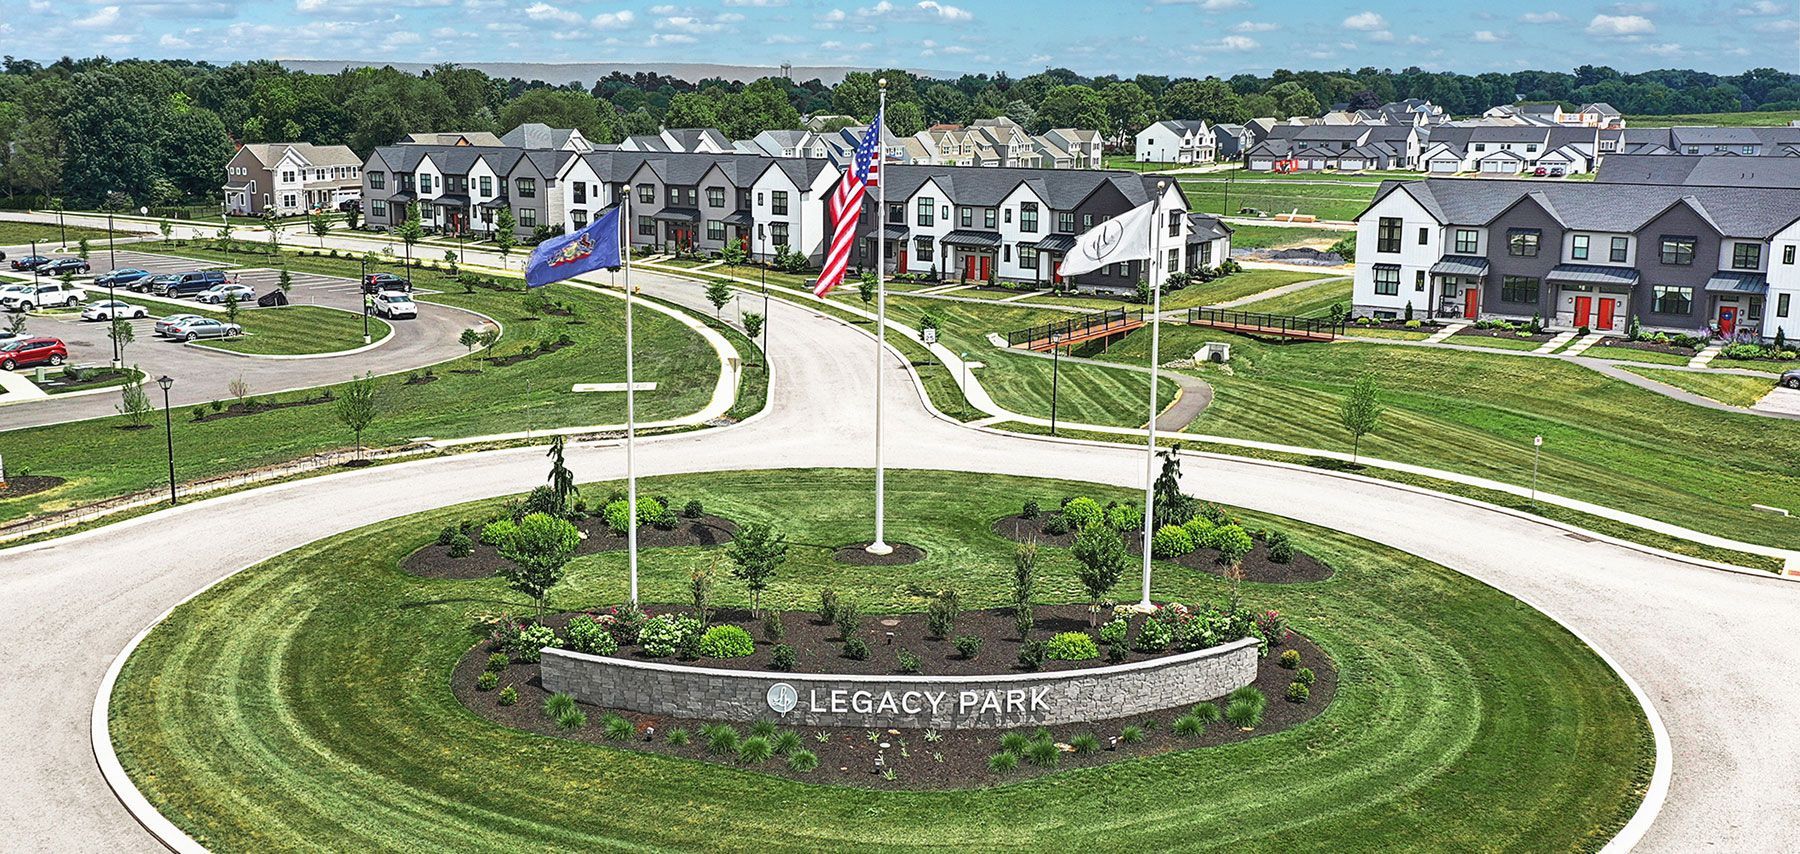 Entrance to Legacy Park New Home Community in Mechanicsburg PA